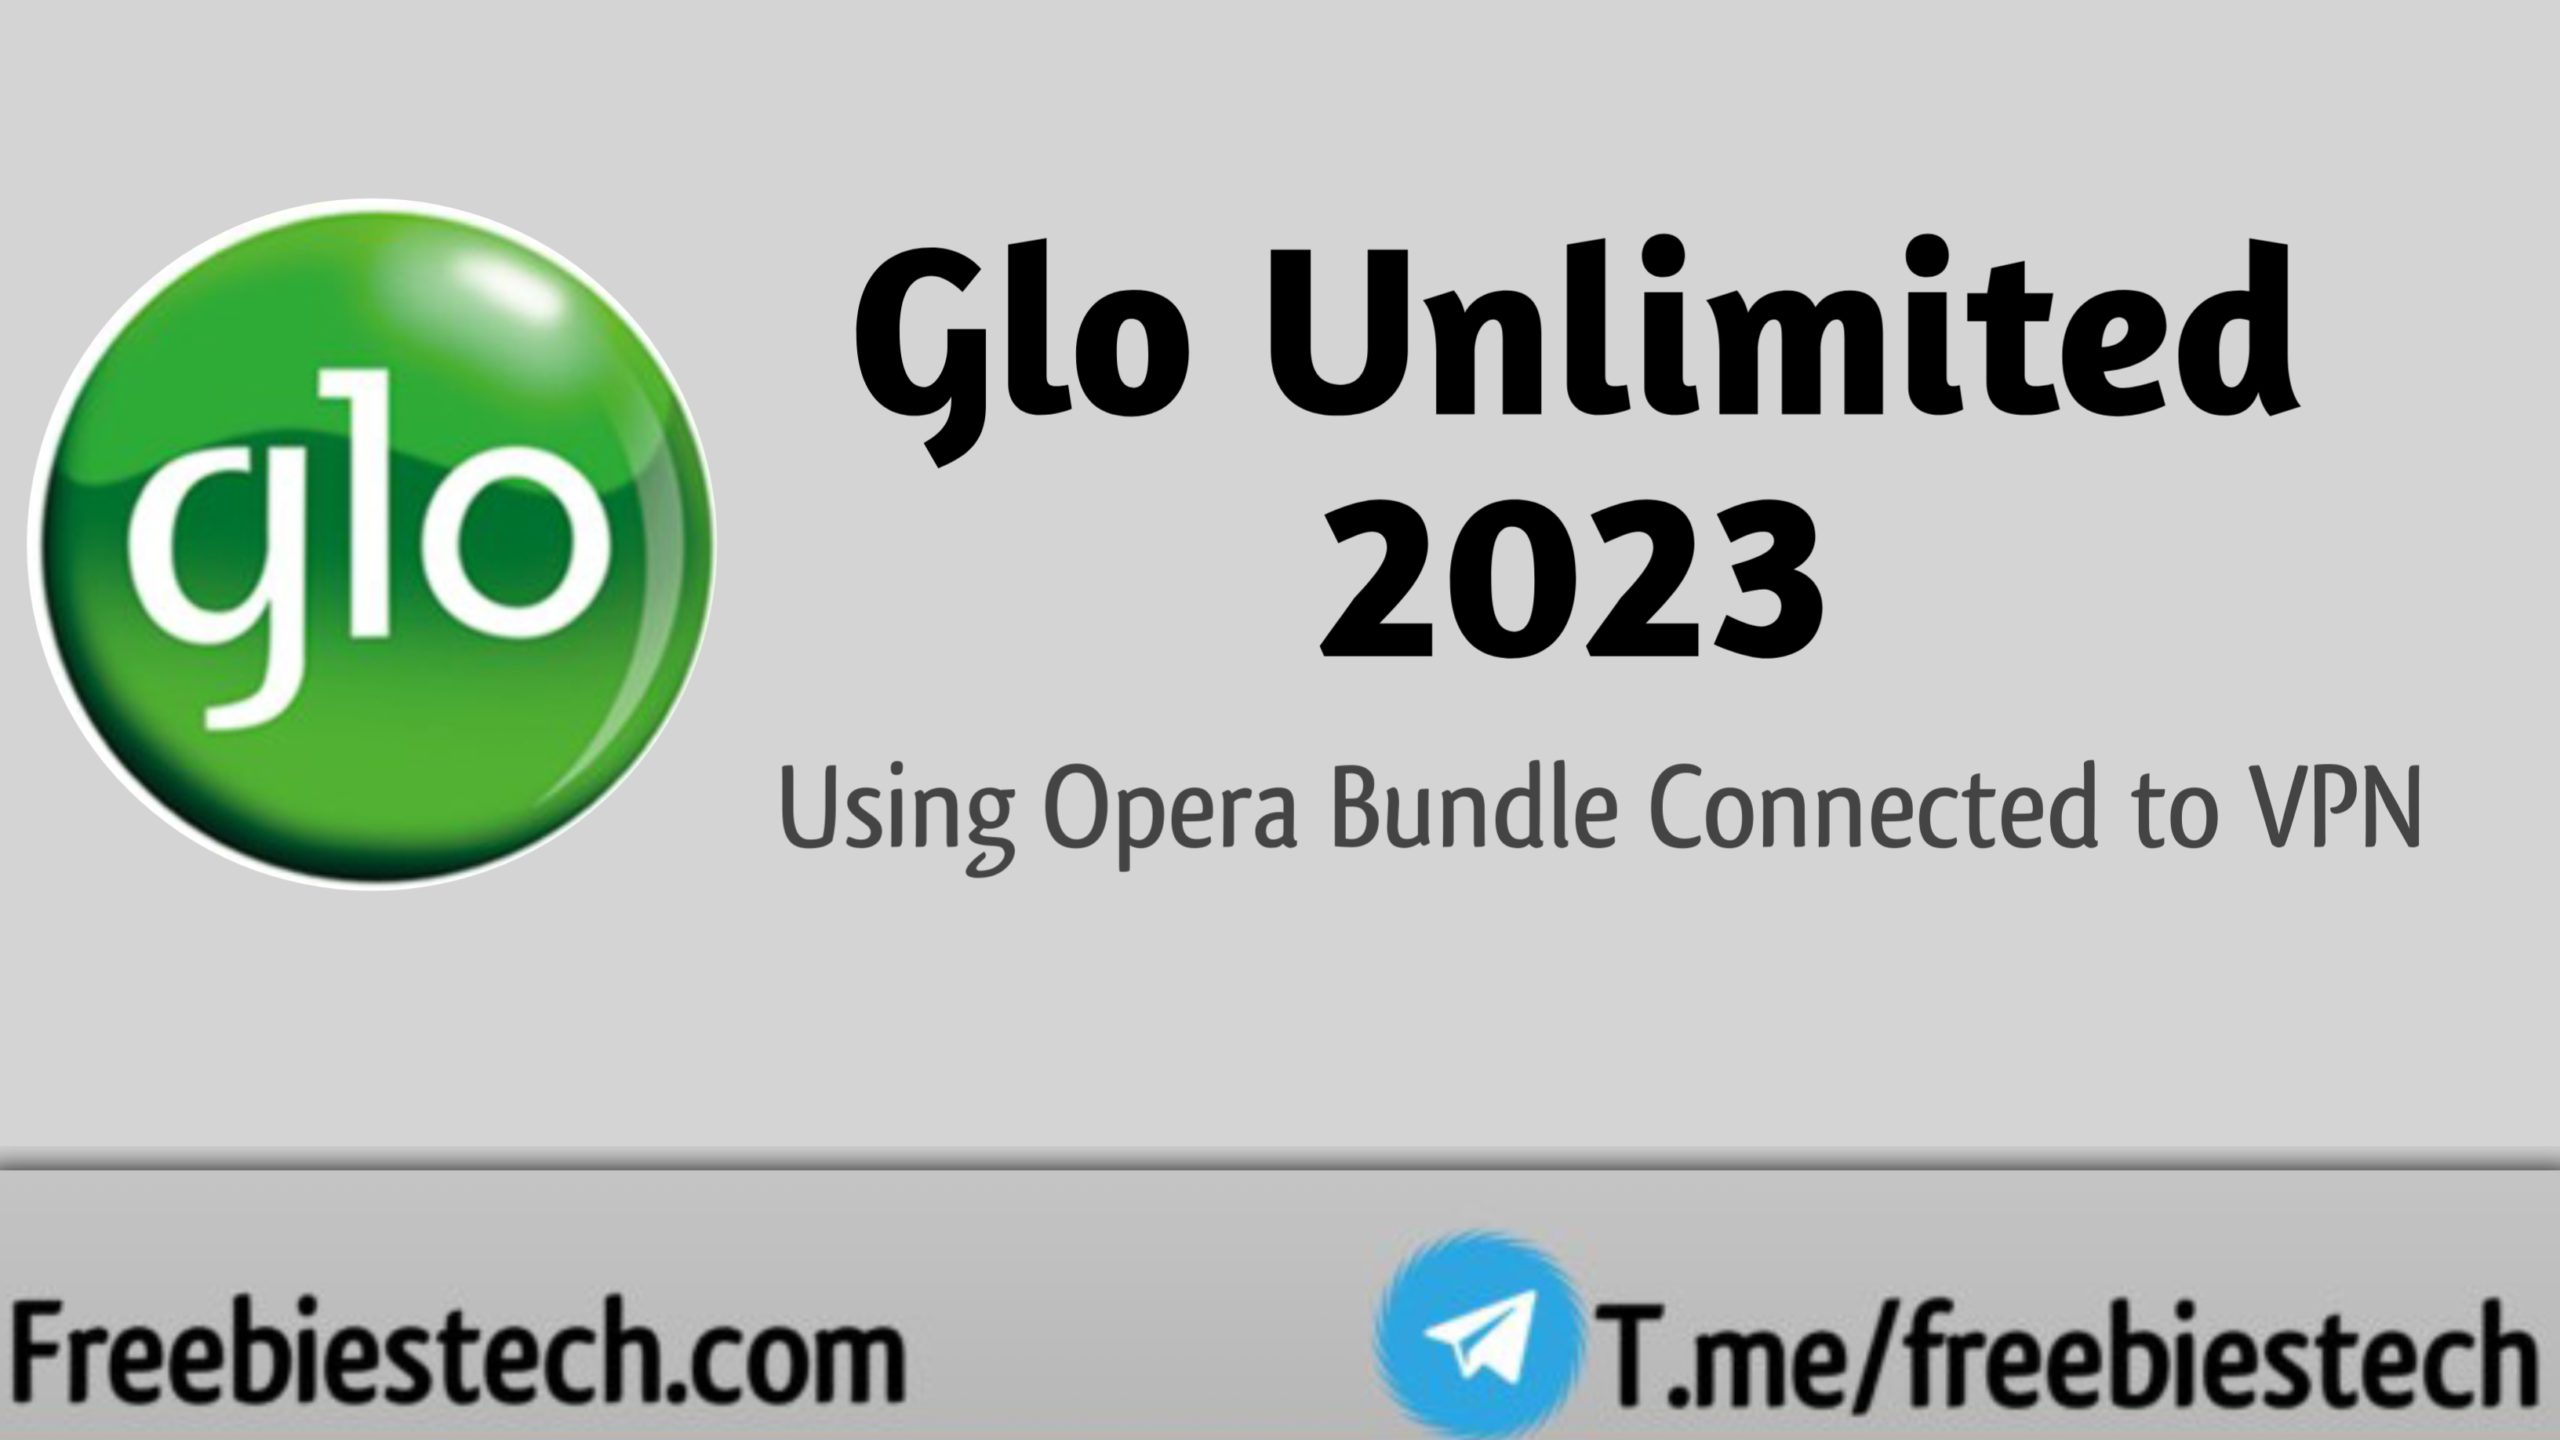 How to Activate Glo Unlimited Cheat using VPN - 2023